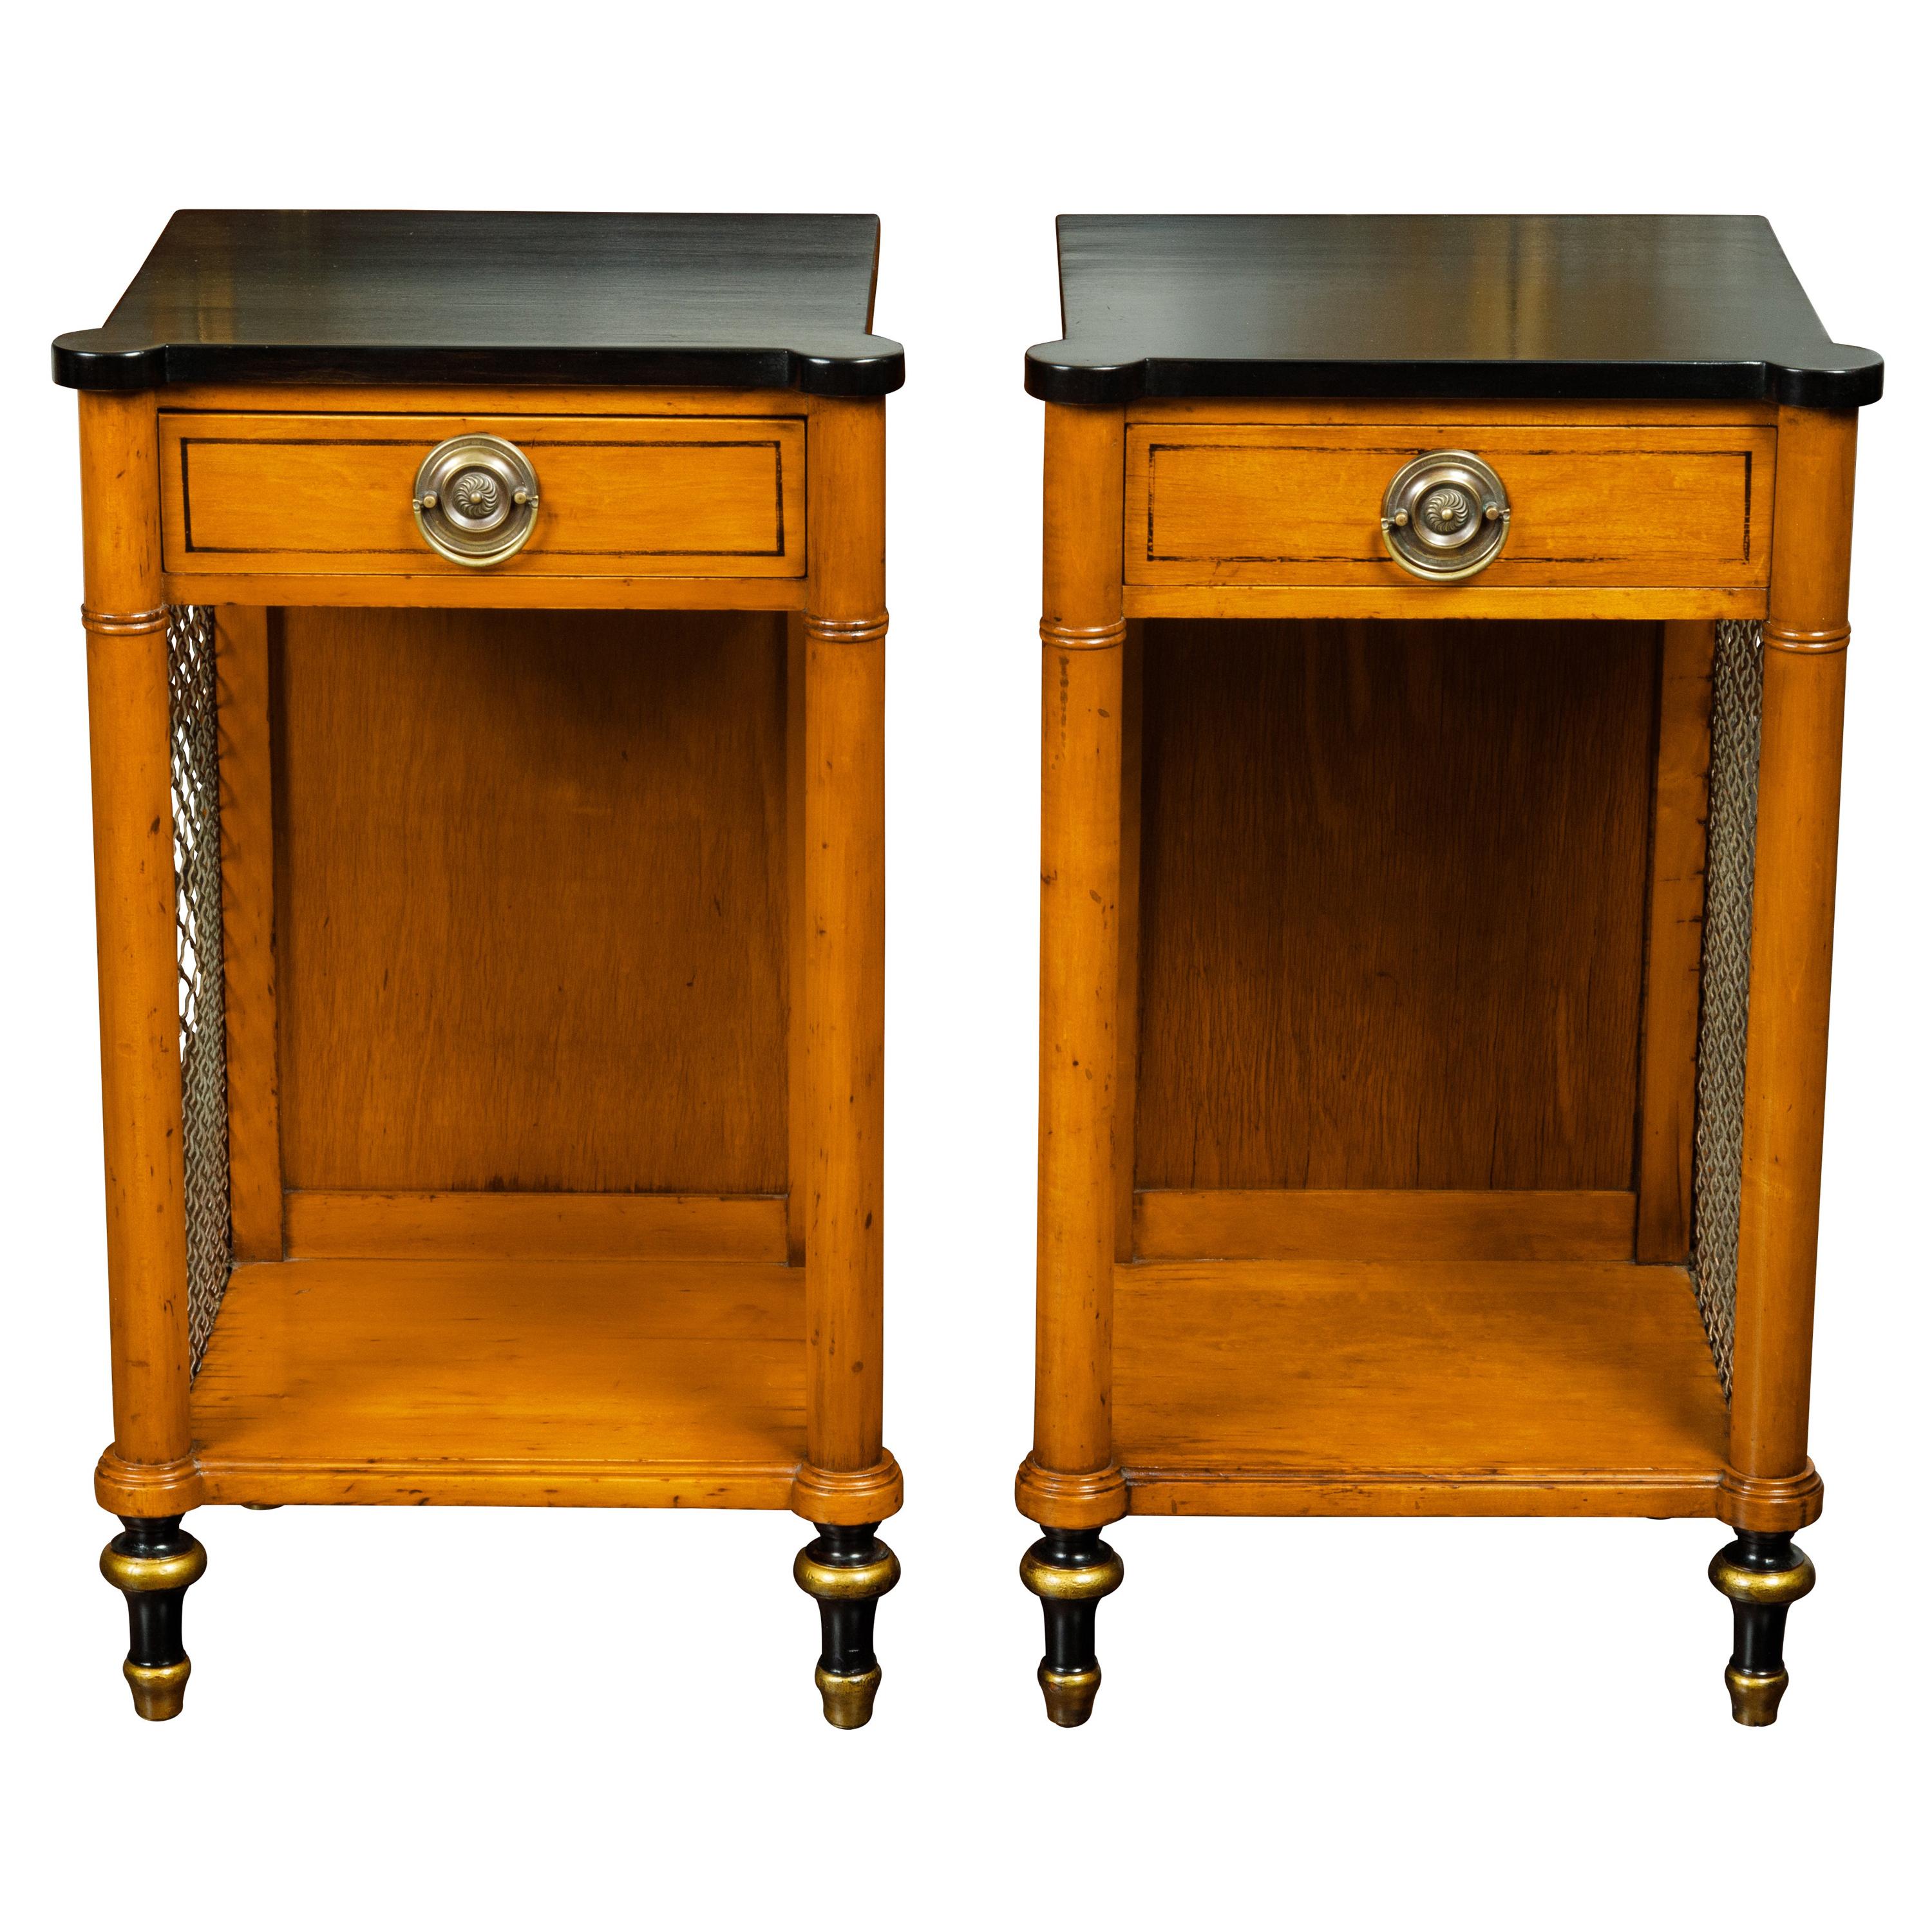 Pair of English Regency Style Midcentury Walnut End Tables with Ebonized Tops